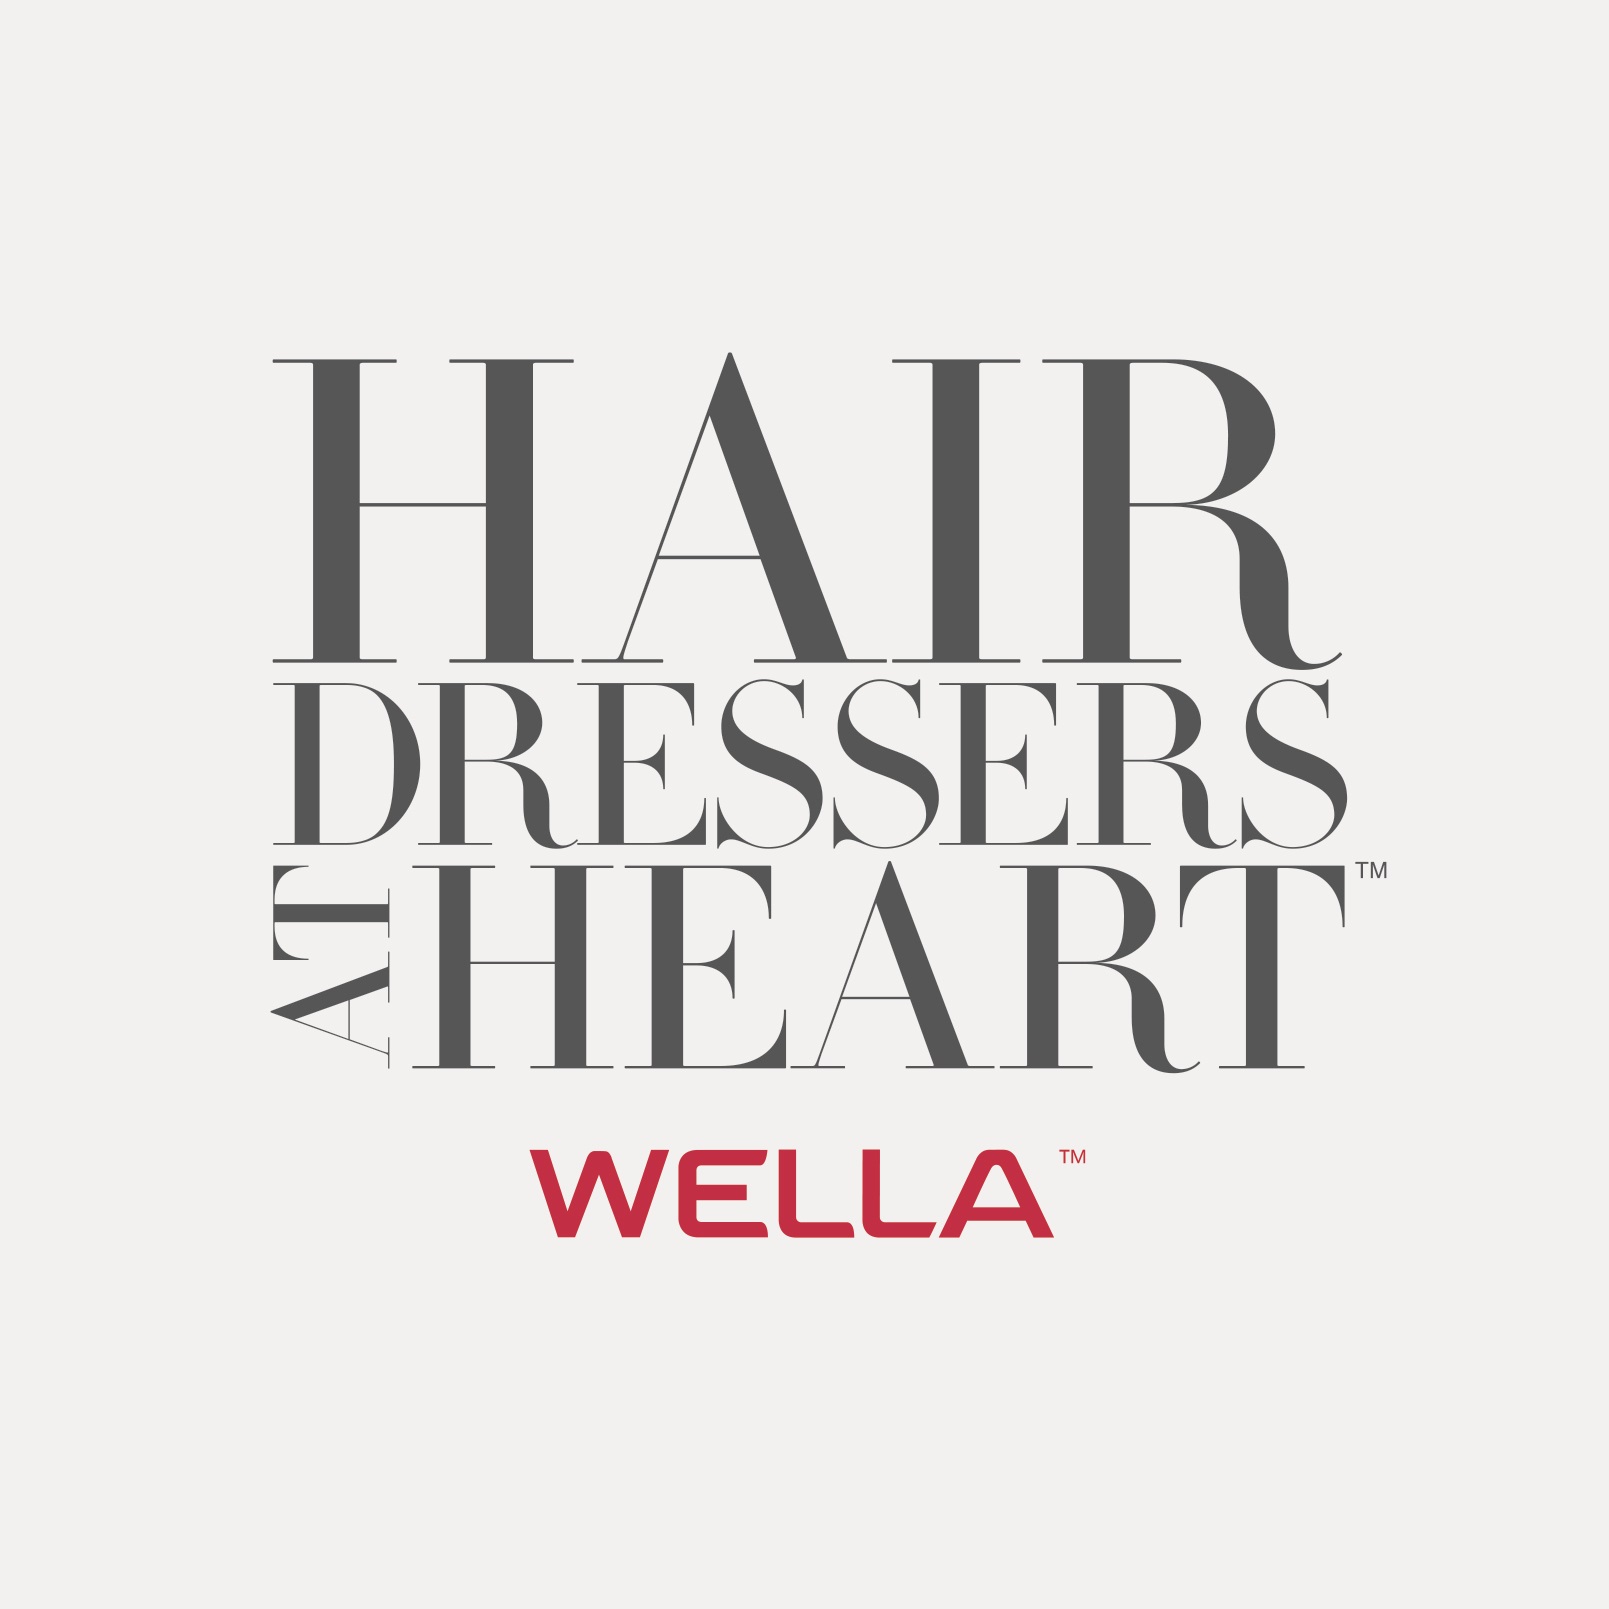 Hairdressers At Heart is a program to help stylists develop their talents throughout their career. Our goal is to be a vital partner to salons, empowering individual stylists and our entire industry.